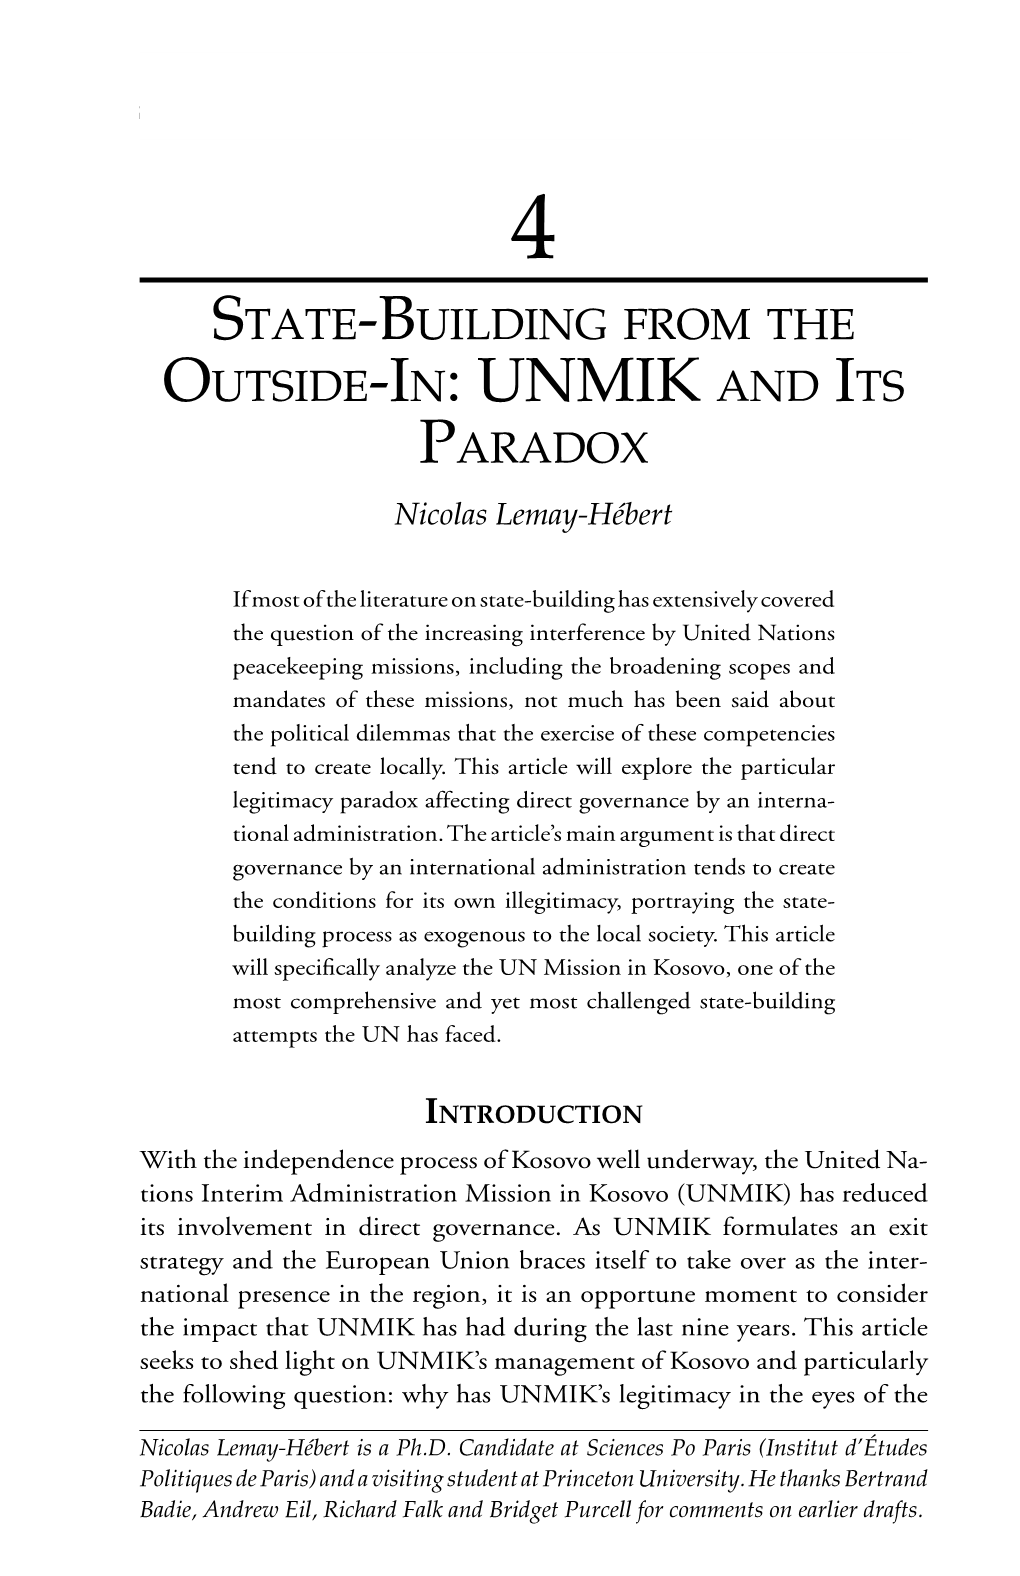 State-Building from the Outside-In: UNMIK and Its Paradox